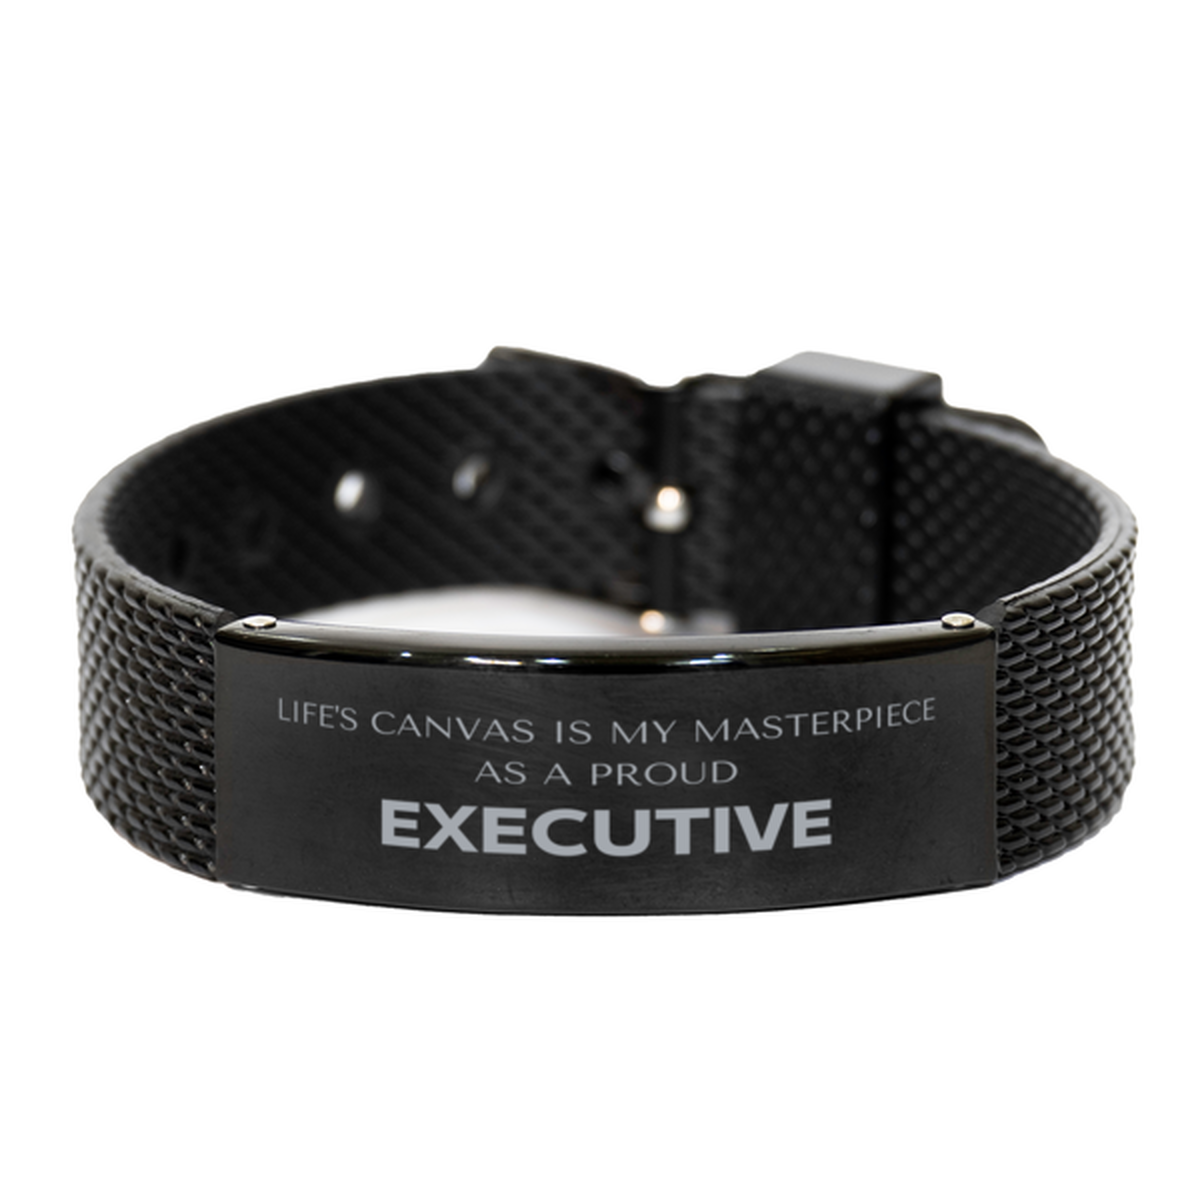 Proud Executive Gifts, Life's canvas is my masterpiece, Epic Birthday Christmas Unique Black Shark Mesh Bracelet For Executive, Coworkers, Men, Women, Friends